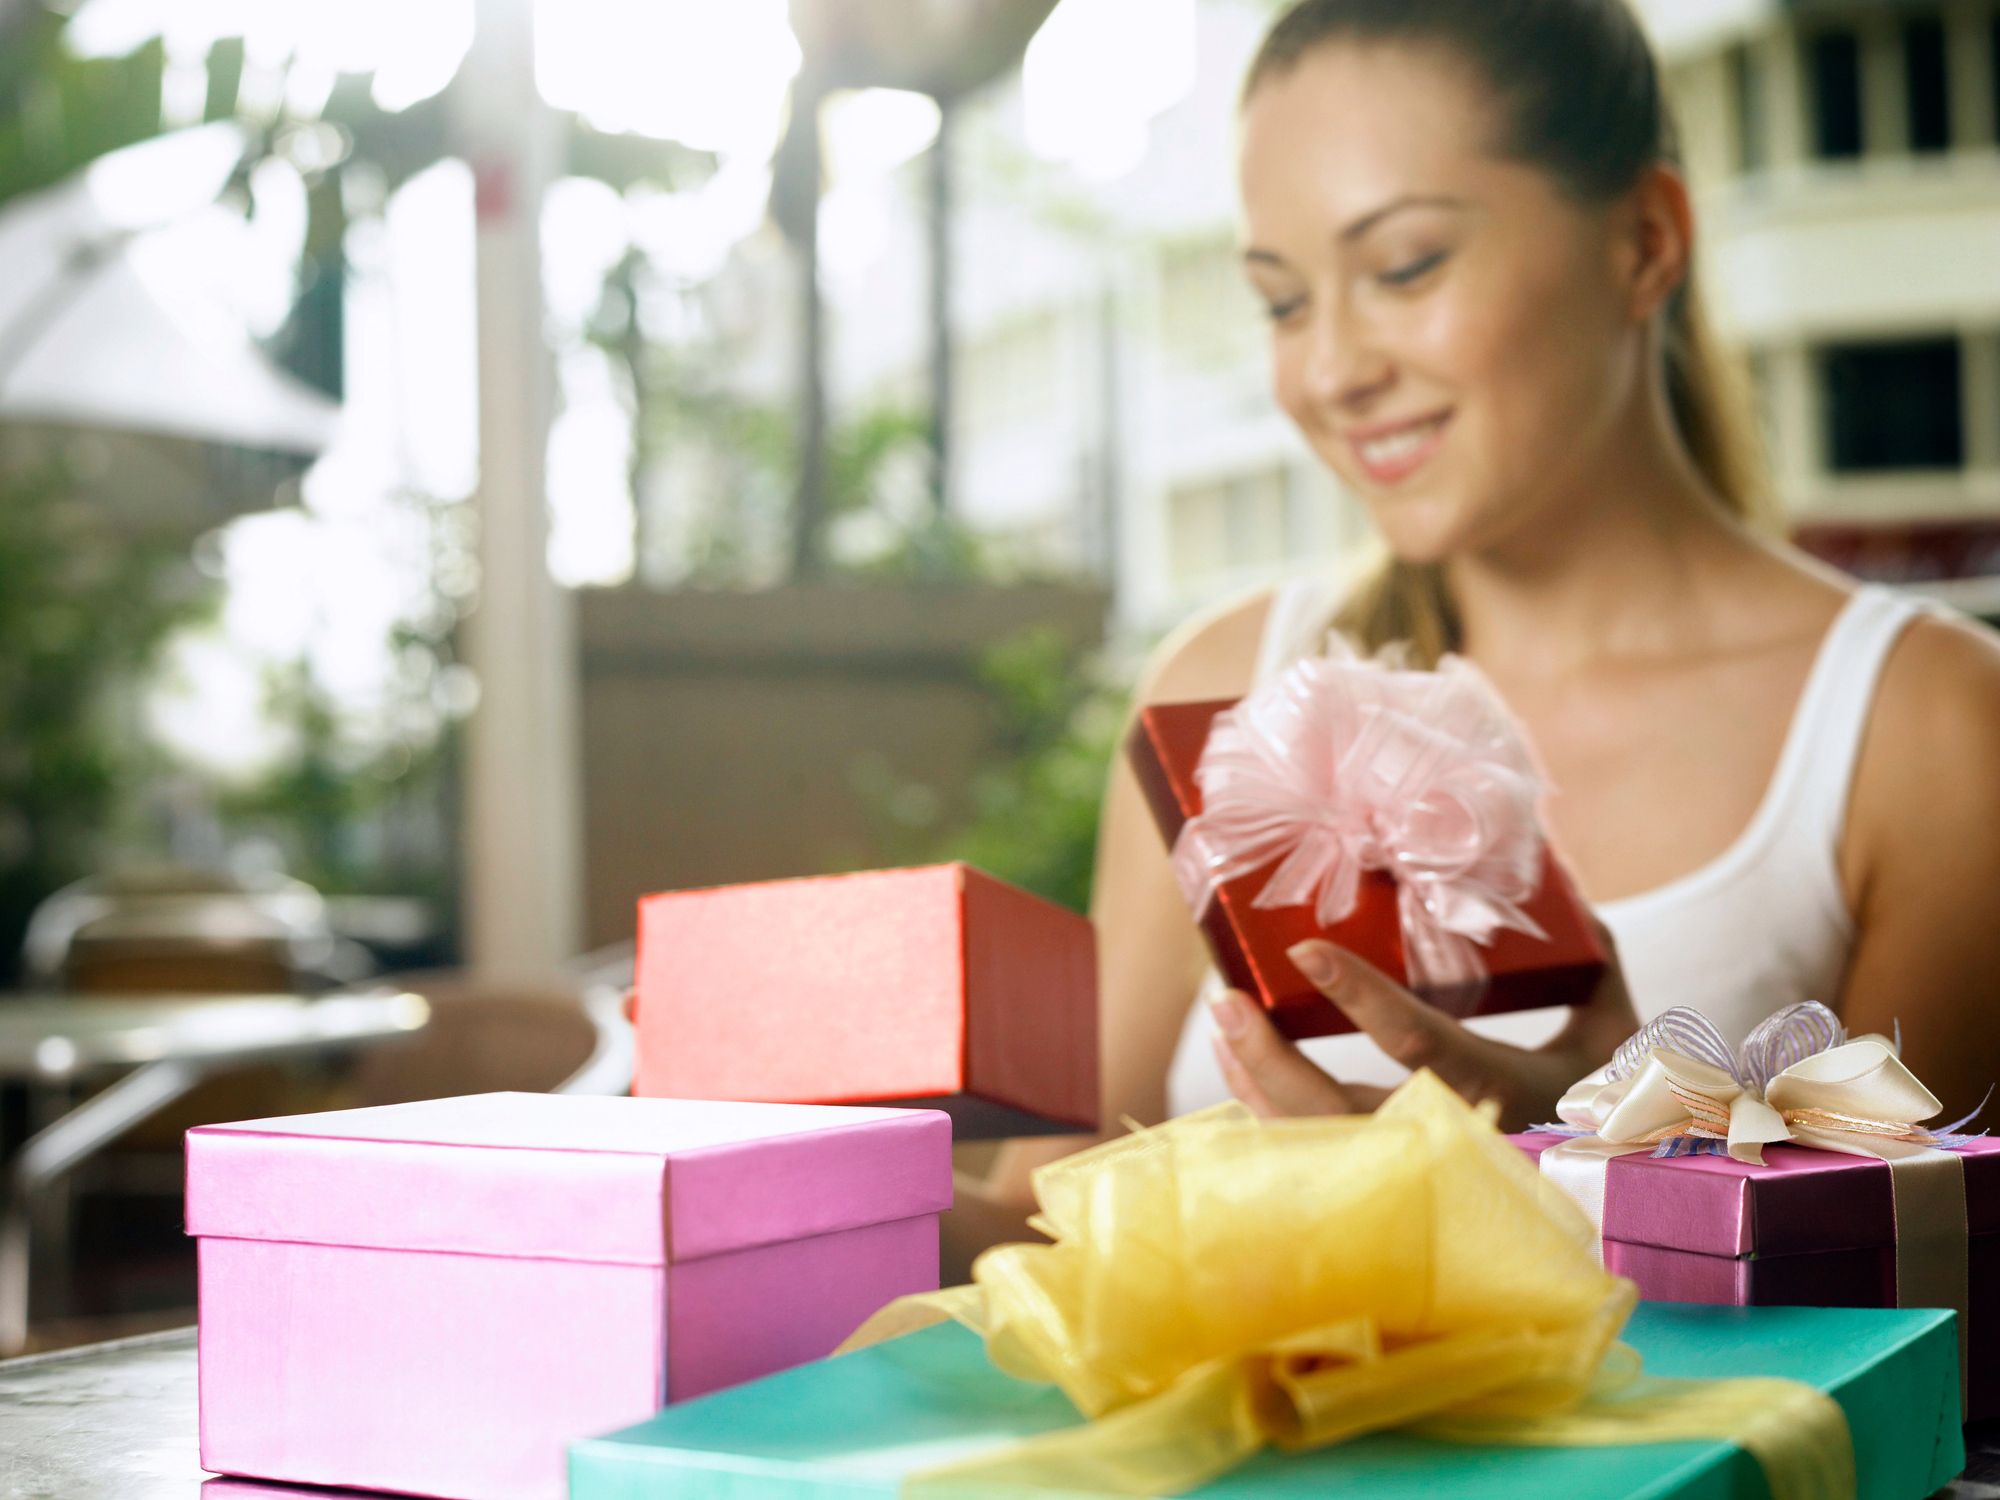 https://hips.hearstapps.com/hmg-prod/images/smiling-woman-looking-at-gifts-in-restaurant-royalty-free-image-1672663531.jpg